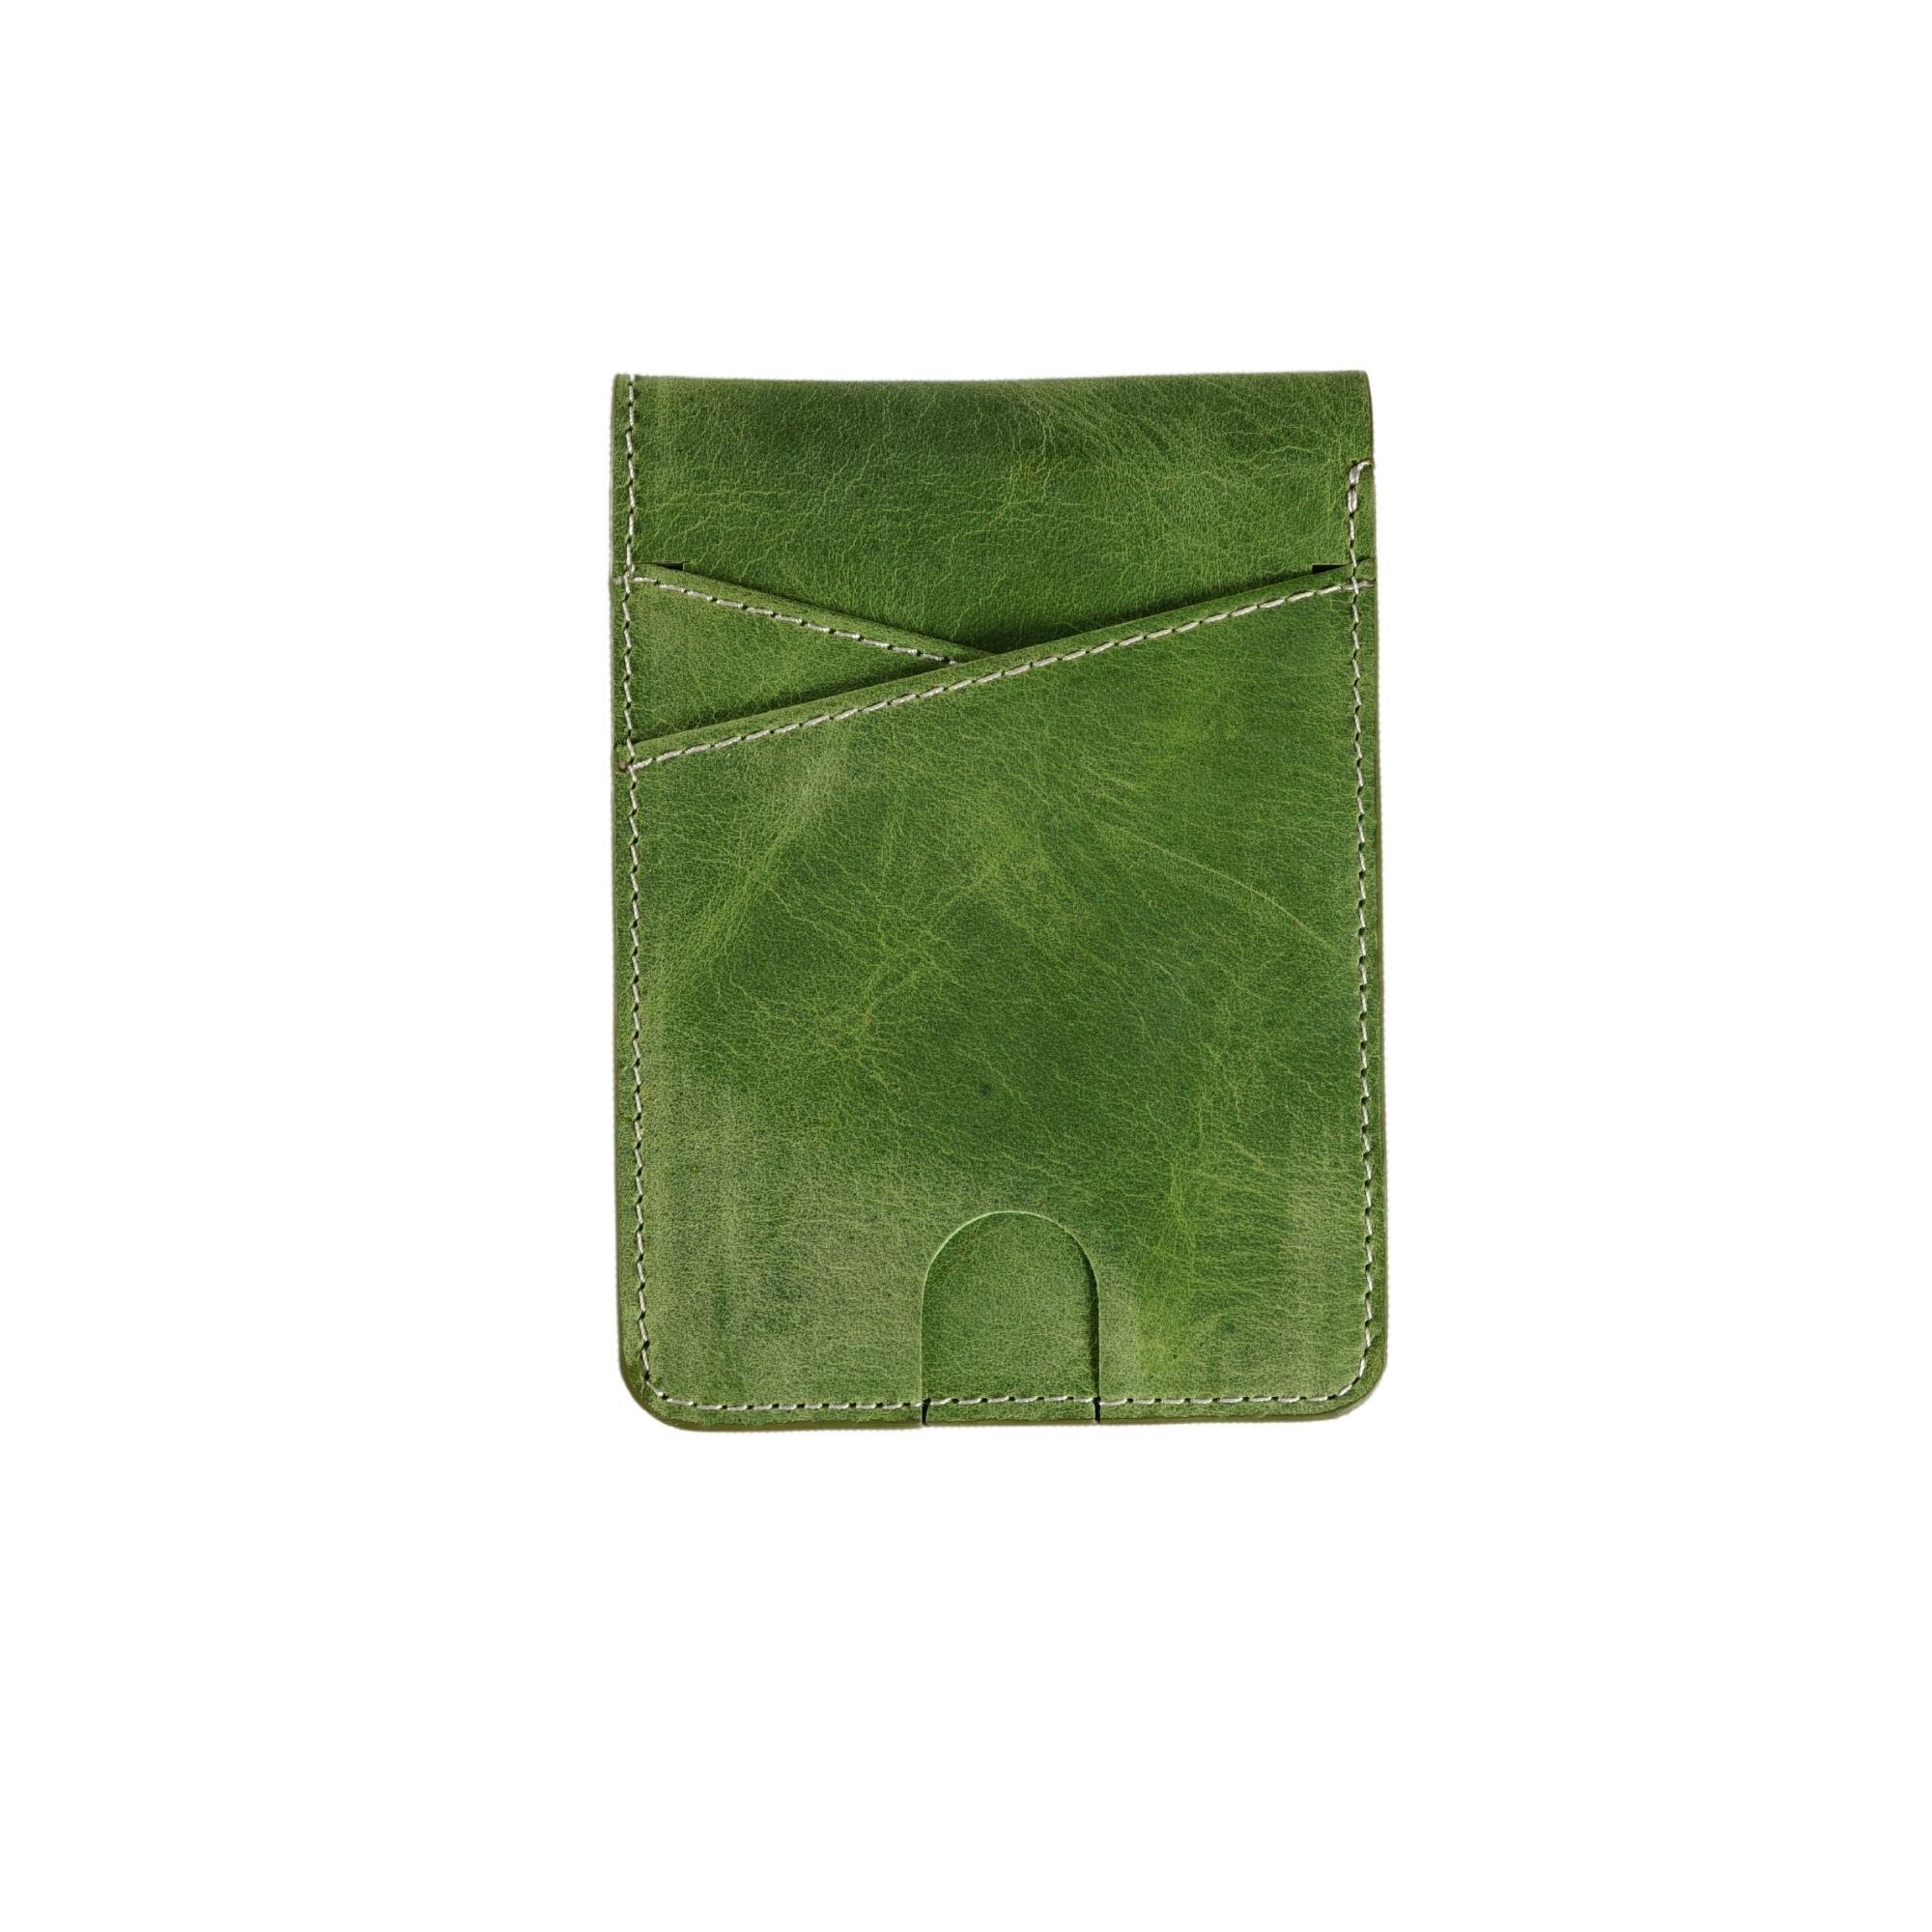 Genuine Leather Minimal Slim and Thin Wallet - Green